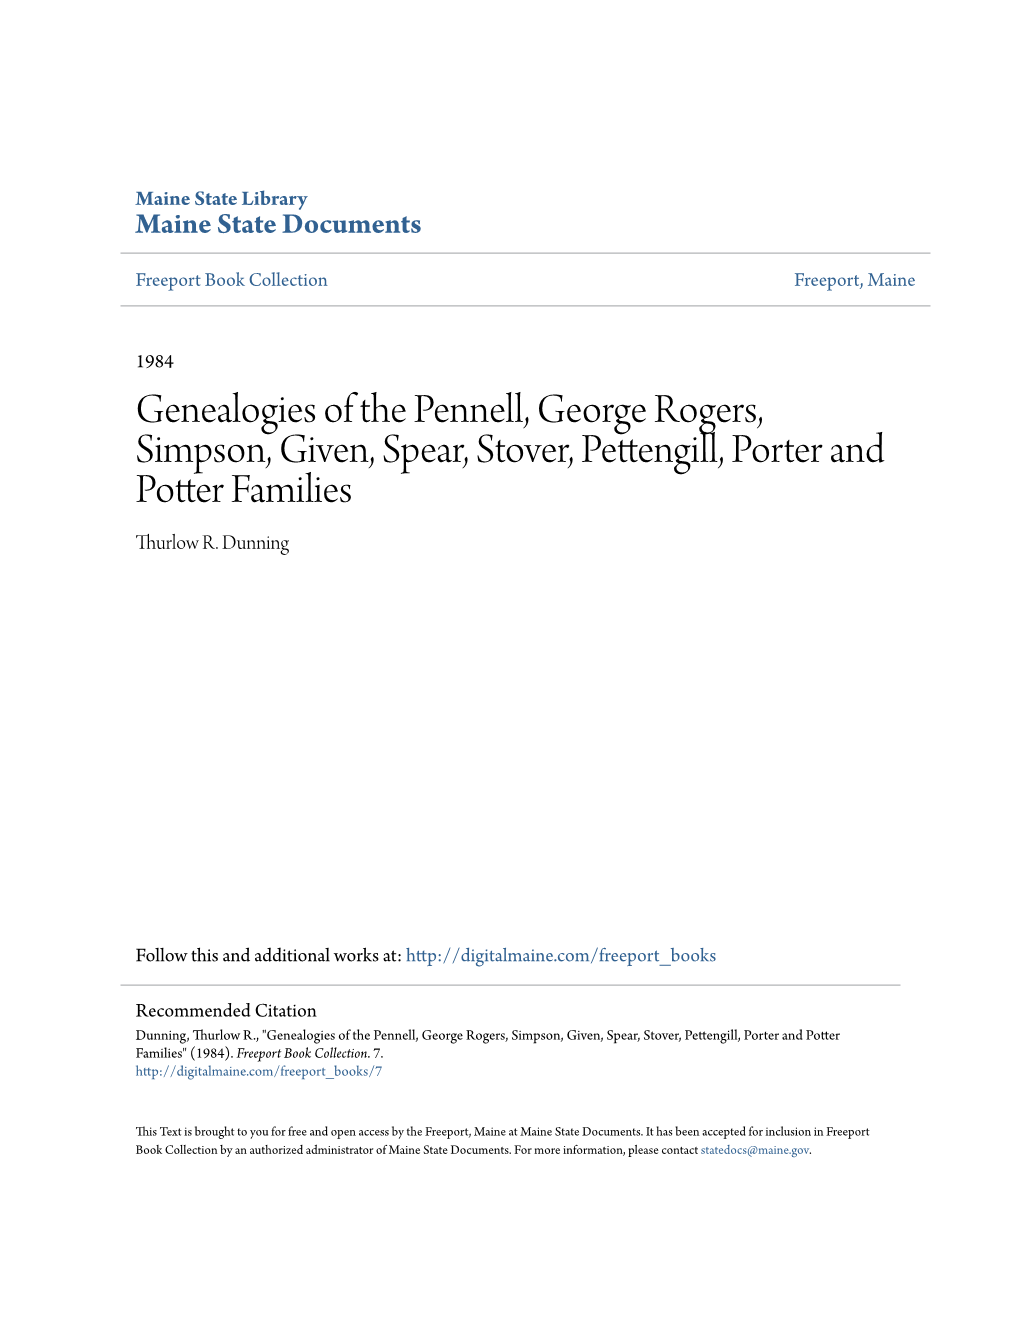 Genealogies of the Pennell, George Rogers, Simpson, Given, Spear, Stover, Pettengill, Porter and Potter Families Thurlow R